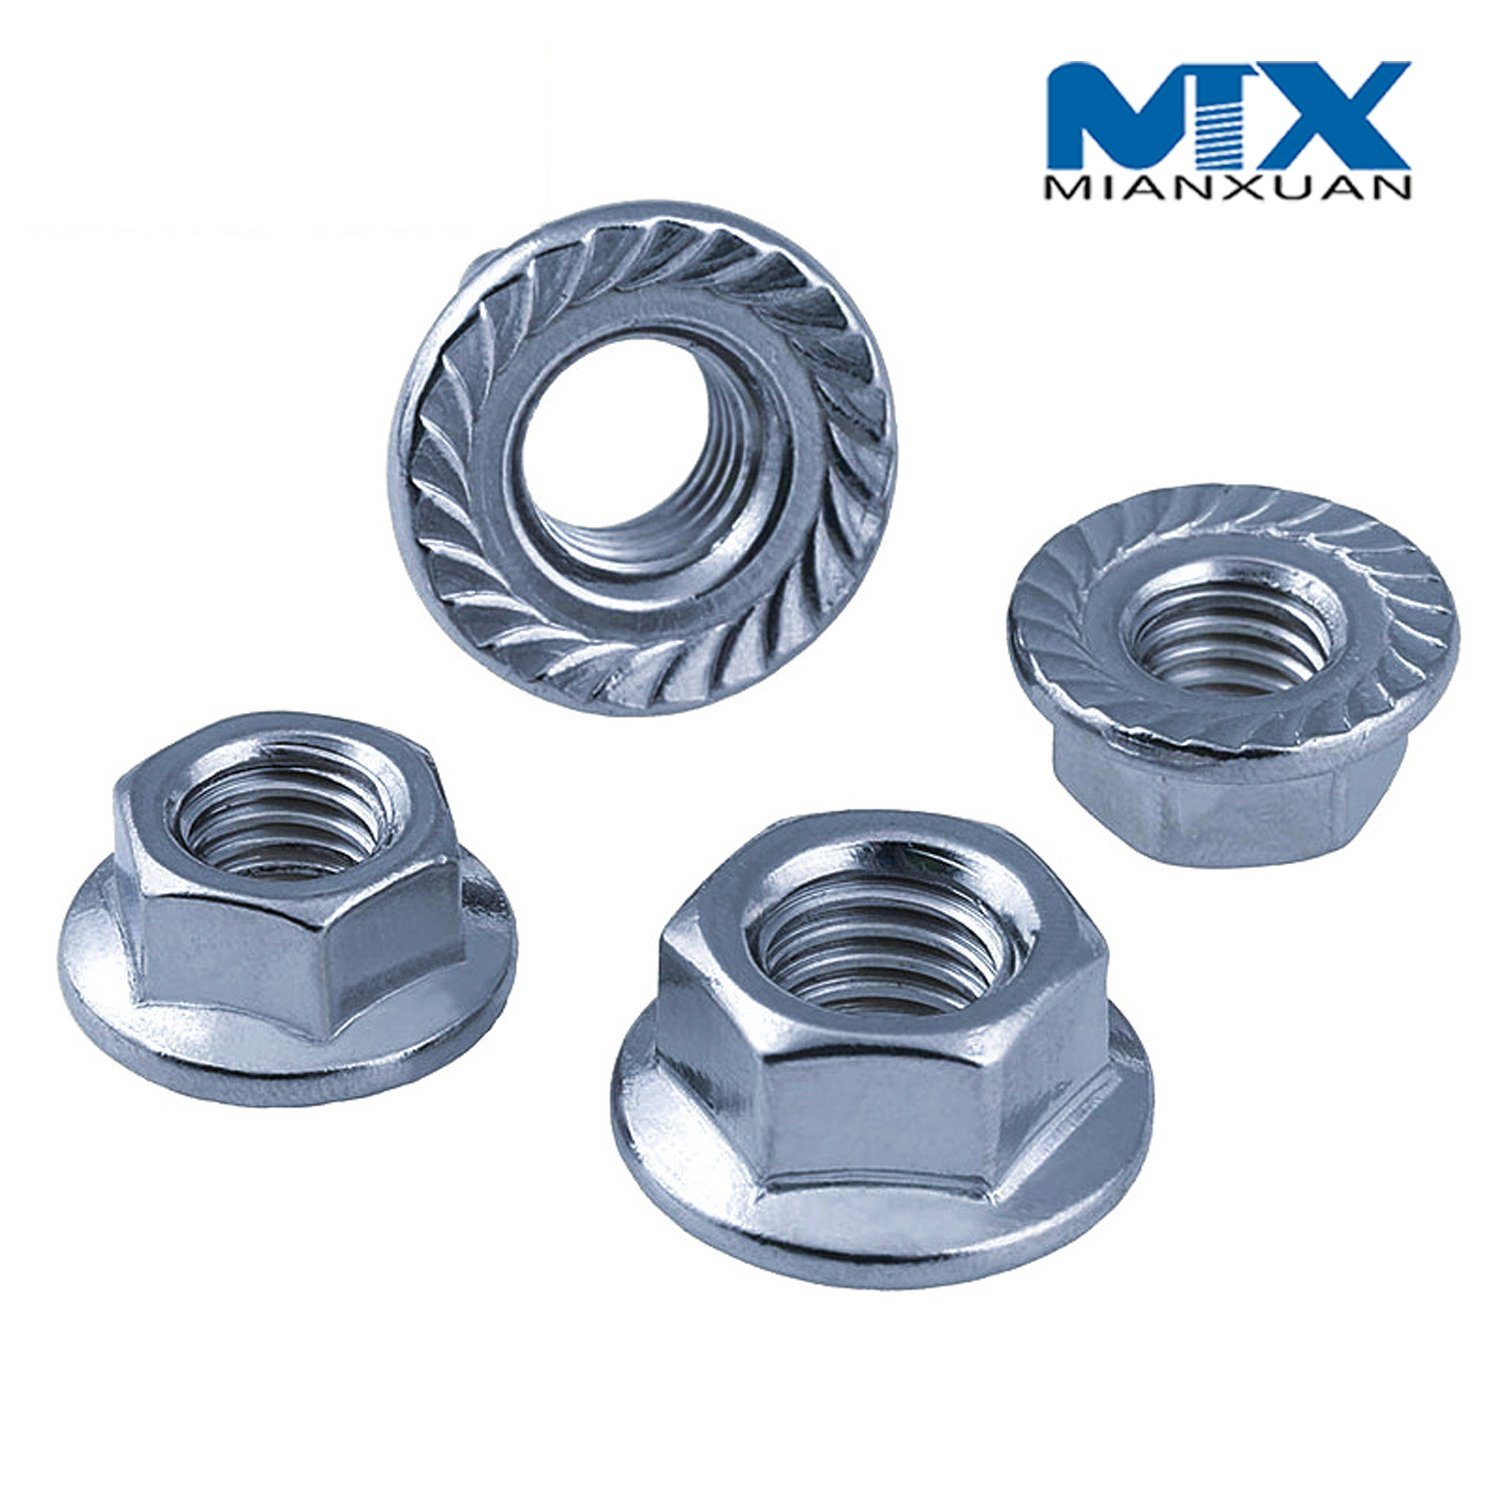 DIN6923 Hex Lock Nut Flange with Knurled No-Knurled